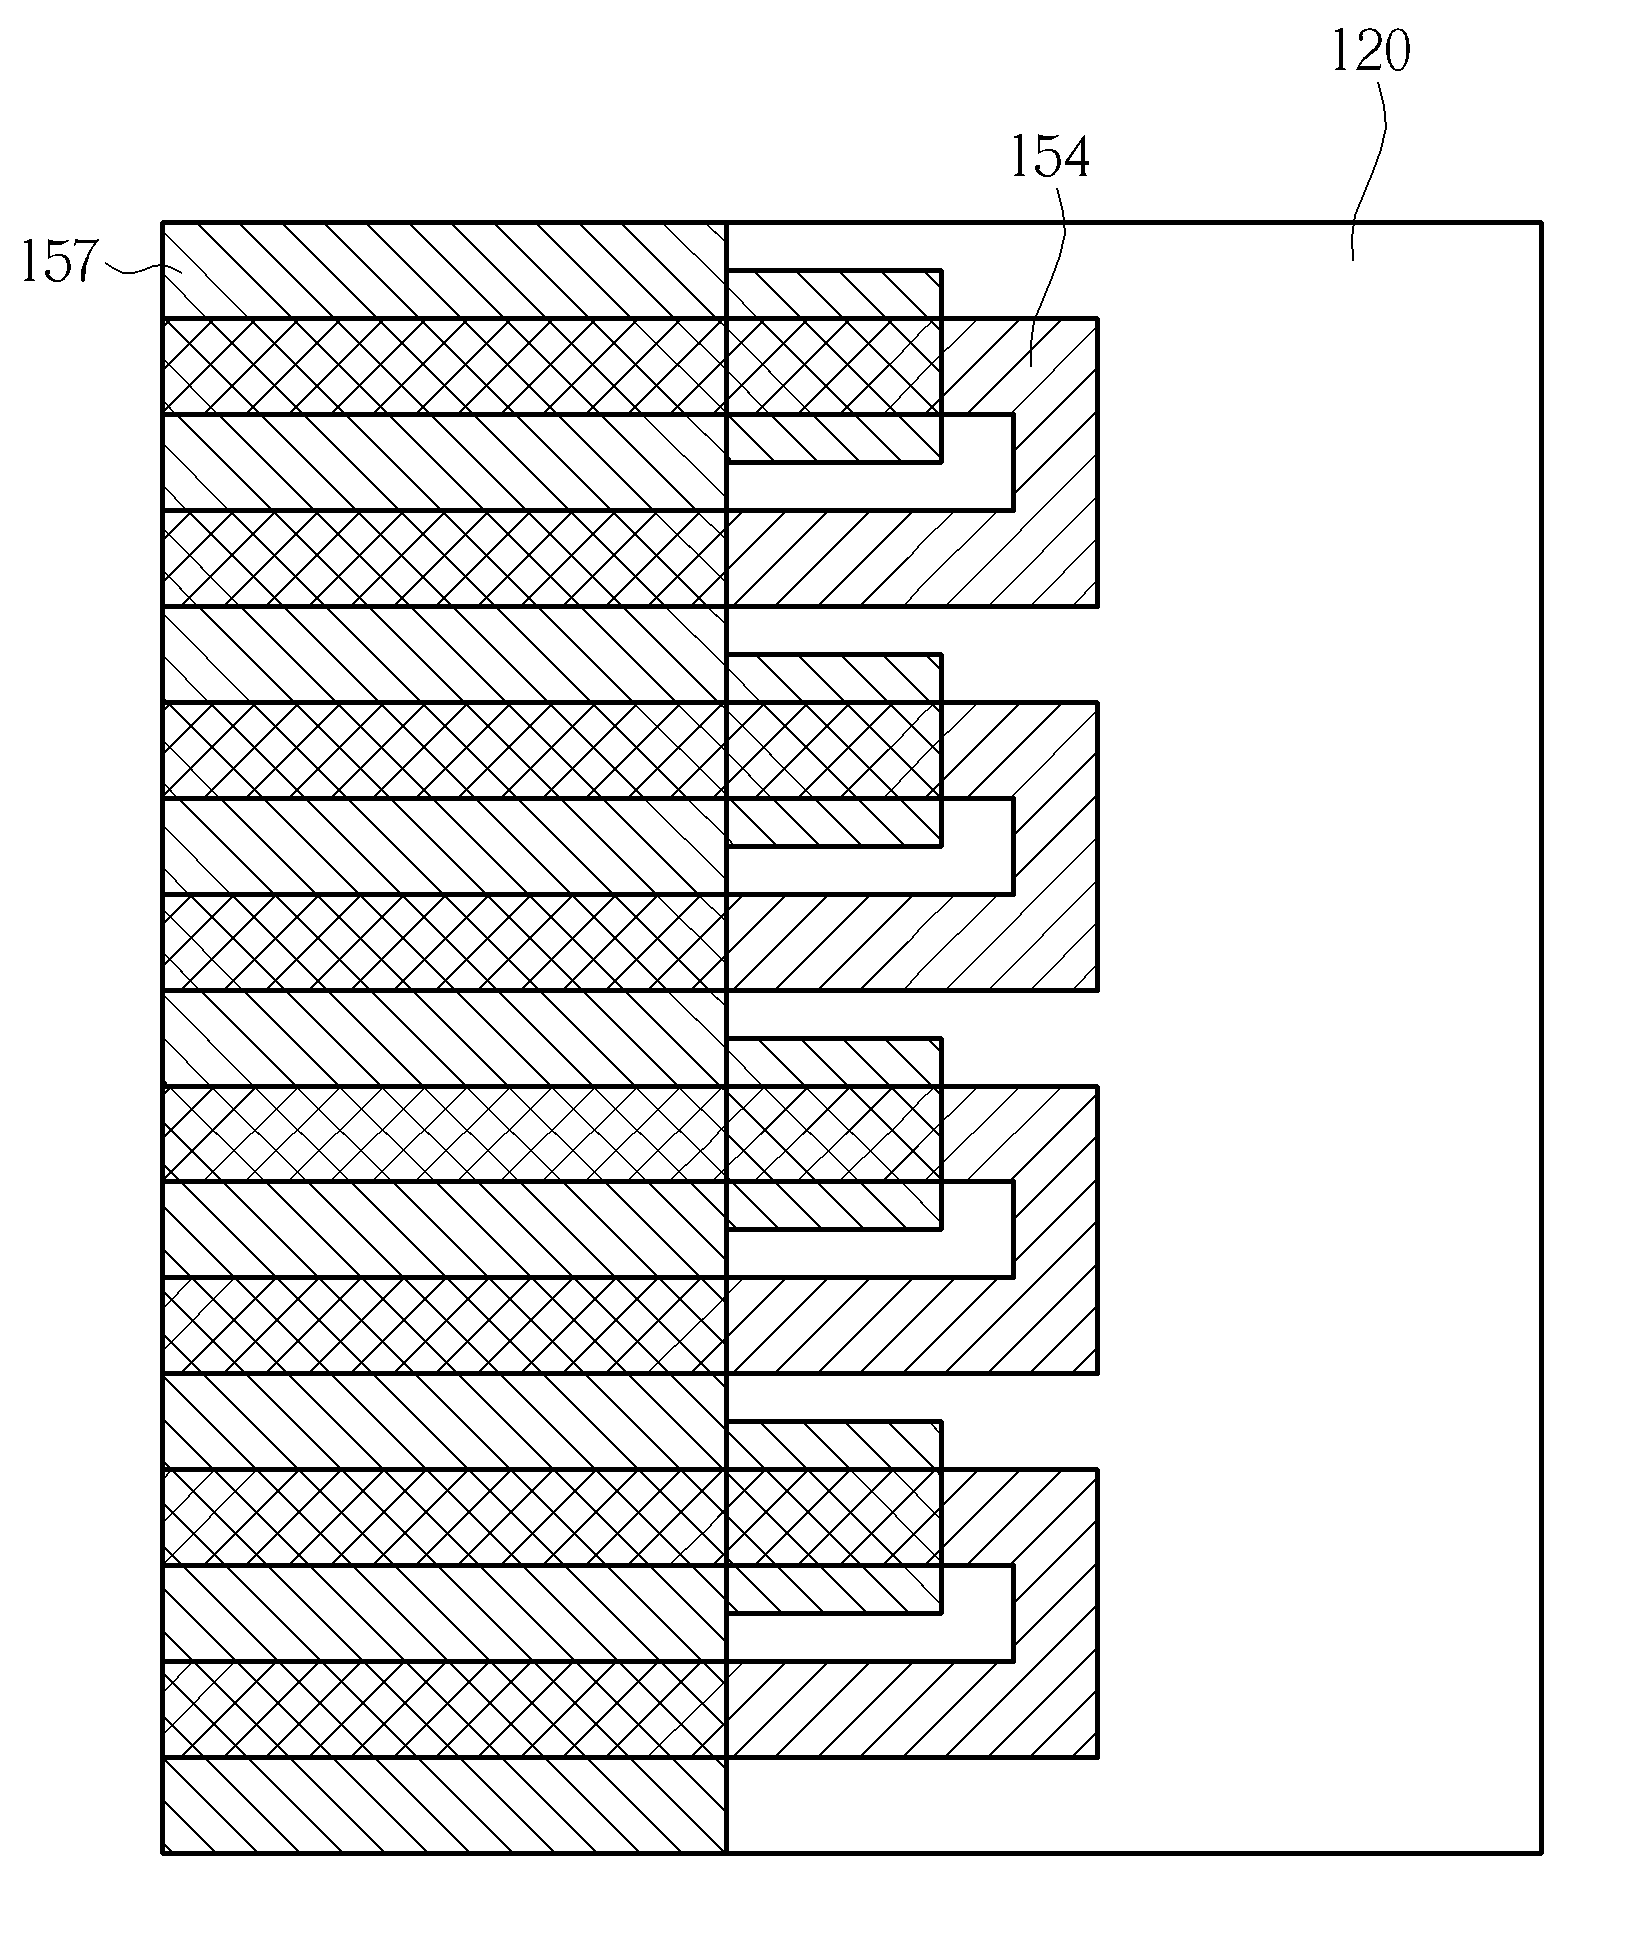 Castle-like chop mask for forming staggered datalines for improved contact isolation and pattern thereof